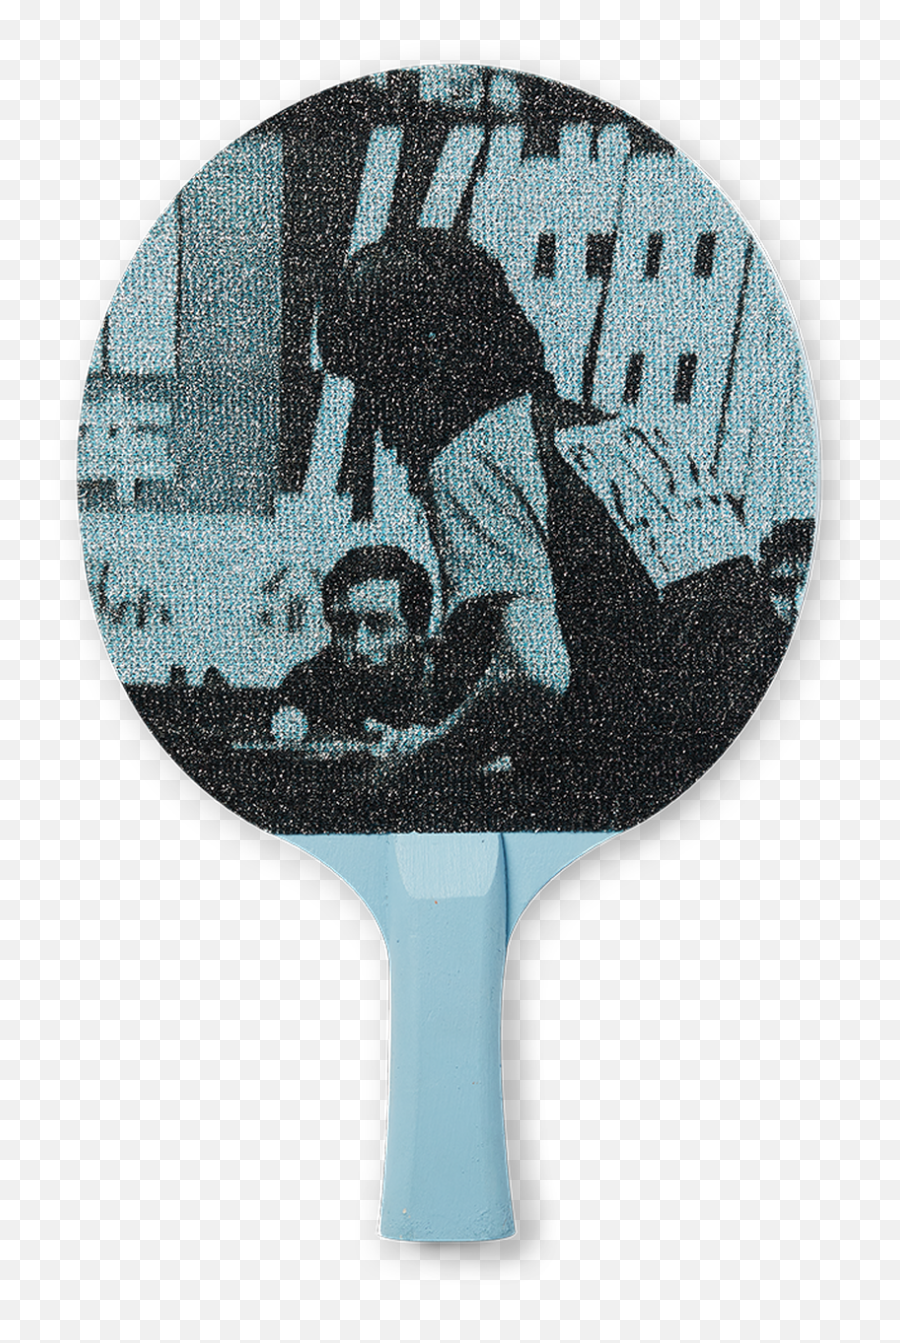 The Art Of Ping Pong Is Back With More One - Ofakind Table Table Tennis Racket Emoji,Ping Pong Emoji